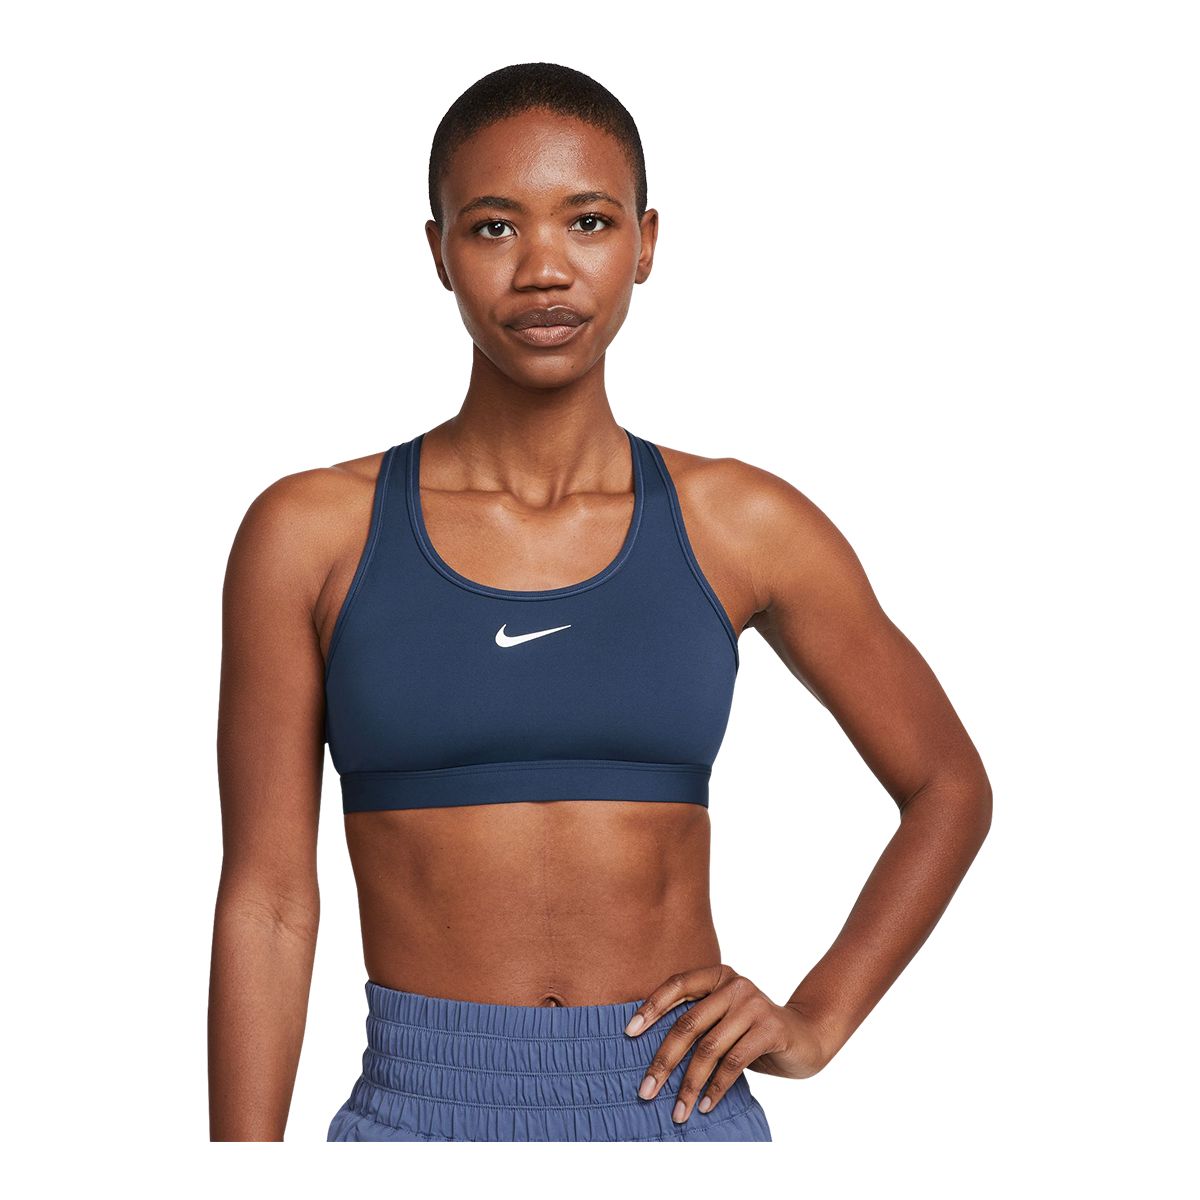 https://media-www.sportchek.ca/product/div-03-softgoods/dpt-70-athletic-clothing/sdpt-02-womens/334211054/nike-women-s-swoosh-medium-sports-bra-d7dce46e-1795-4b6c-84e7-a049a26d3bee-jpgrendition.jpg?imdensity=1&imwidth=1244&impolicy=mZoom